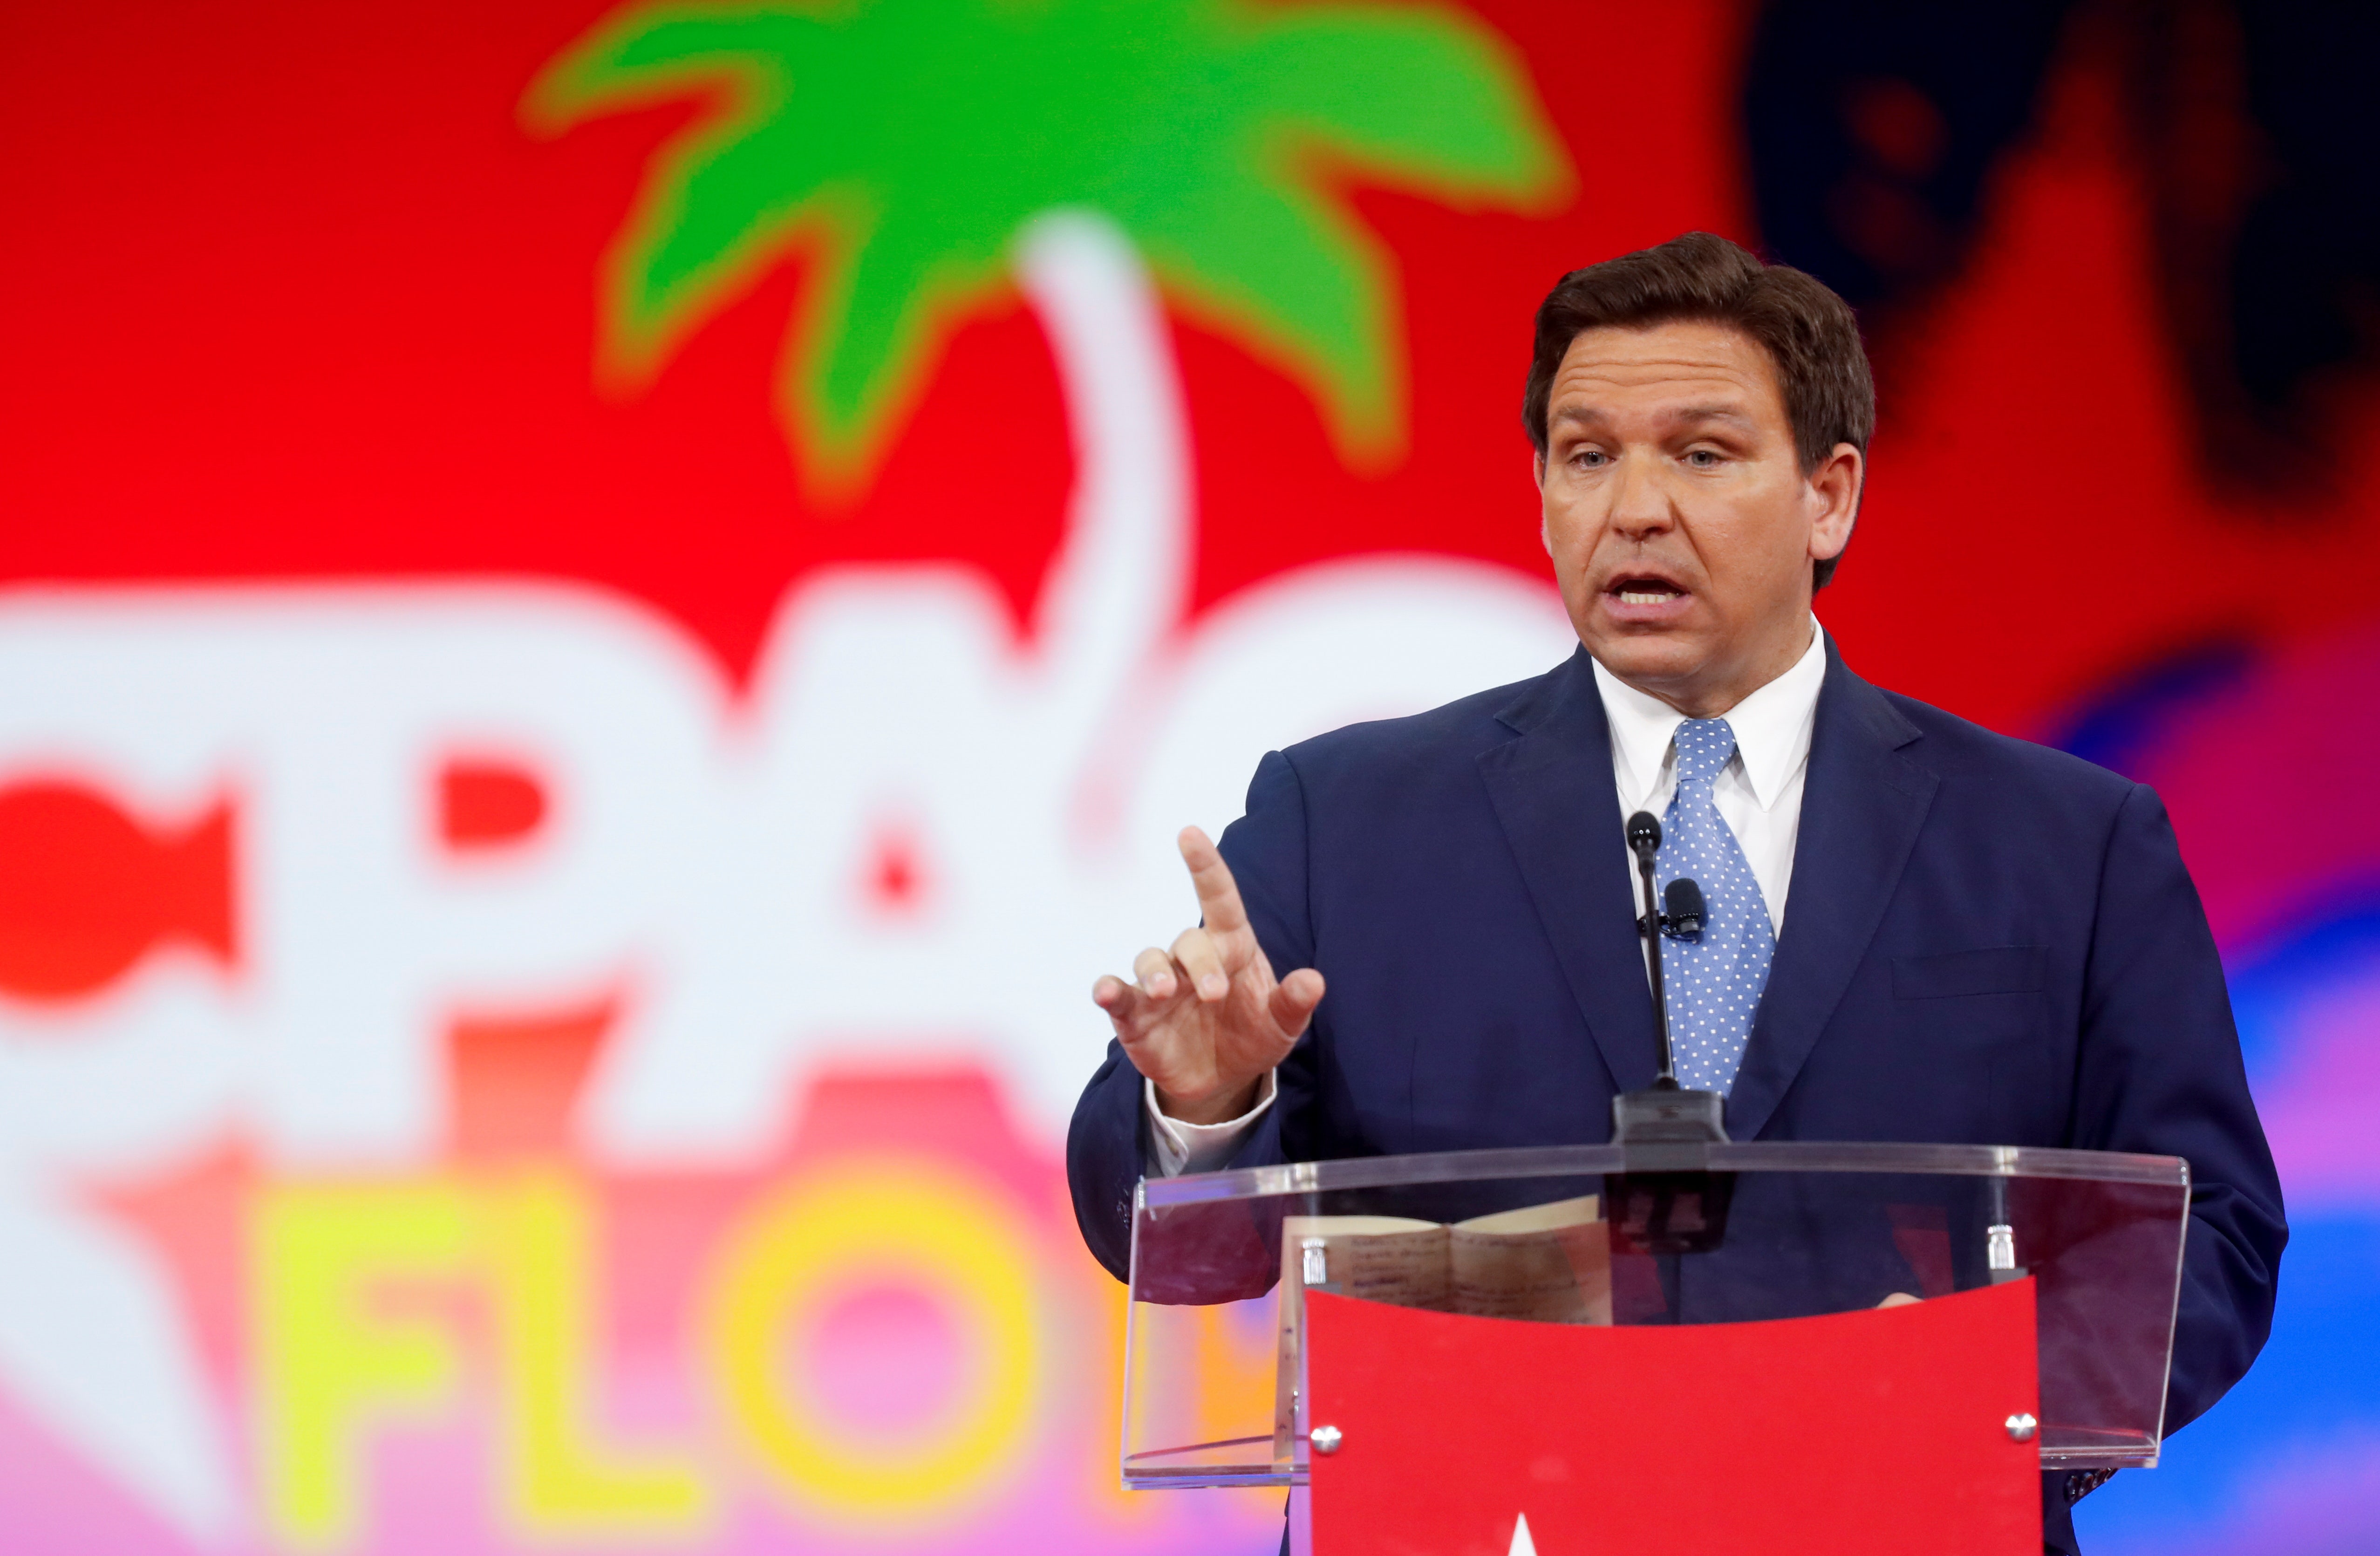 Florida Gov. Ron DeSantis suspends 'Soros-backed' state attorney who refused to enforce abortion ban